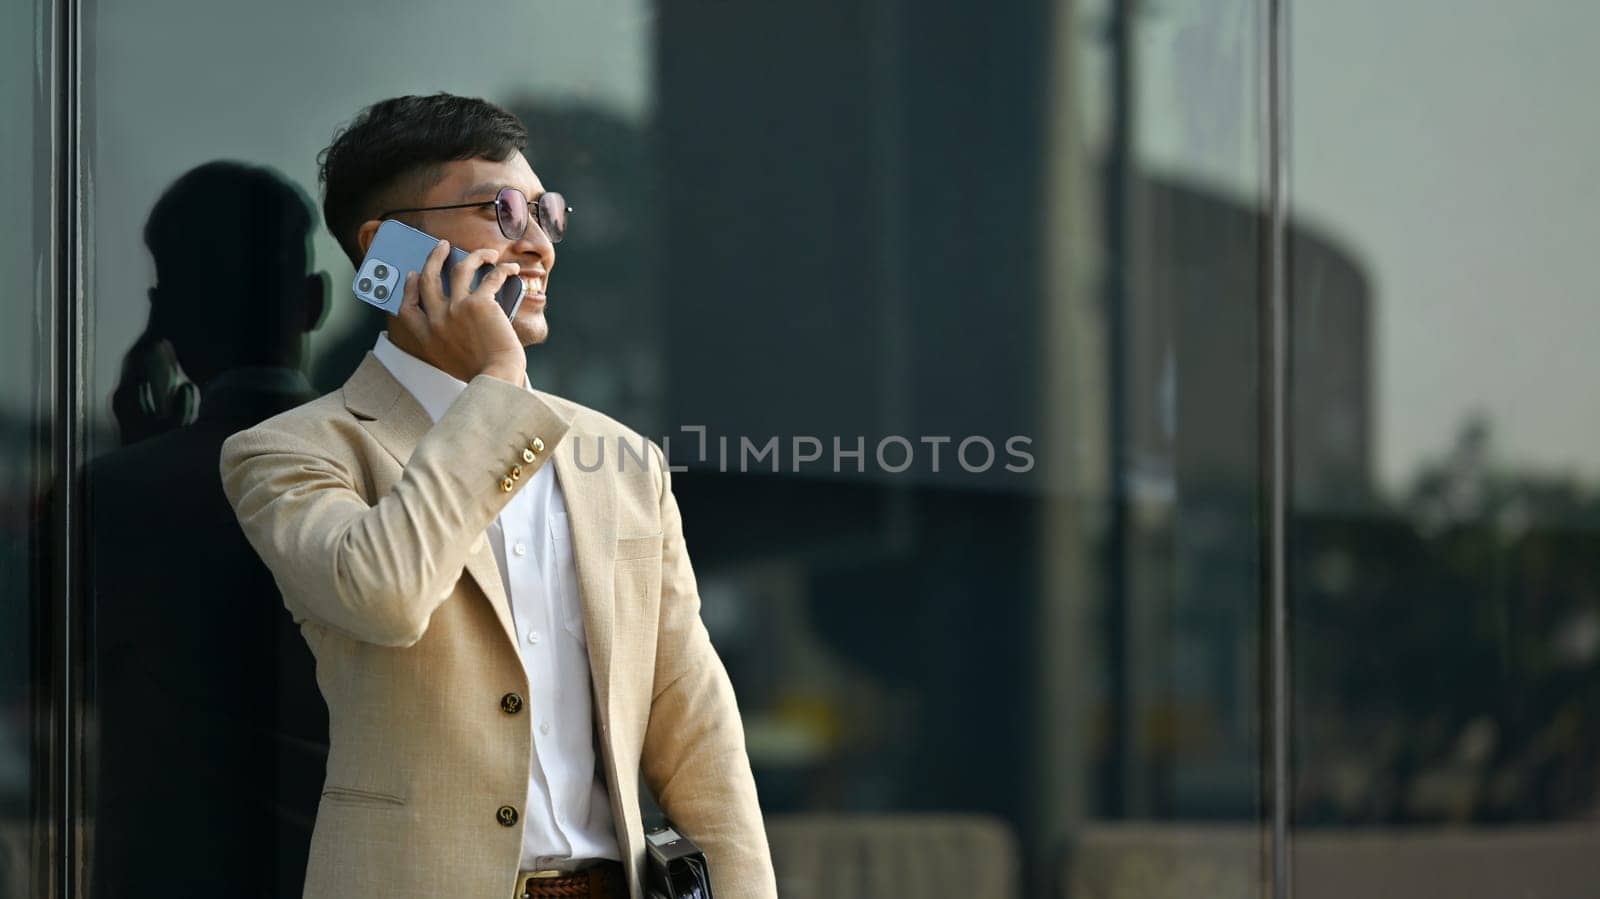 Portrait of adult man in elegant business suit having phone conversation while standing in front of modern office building.